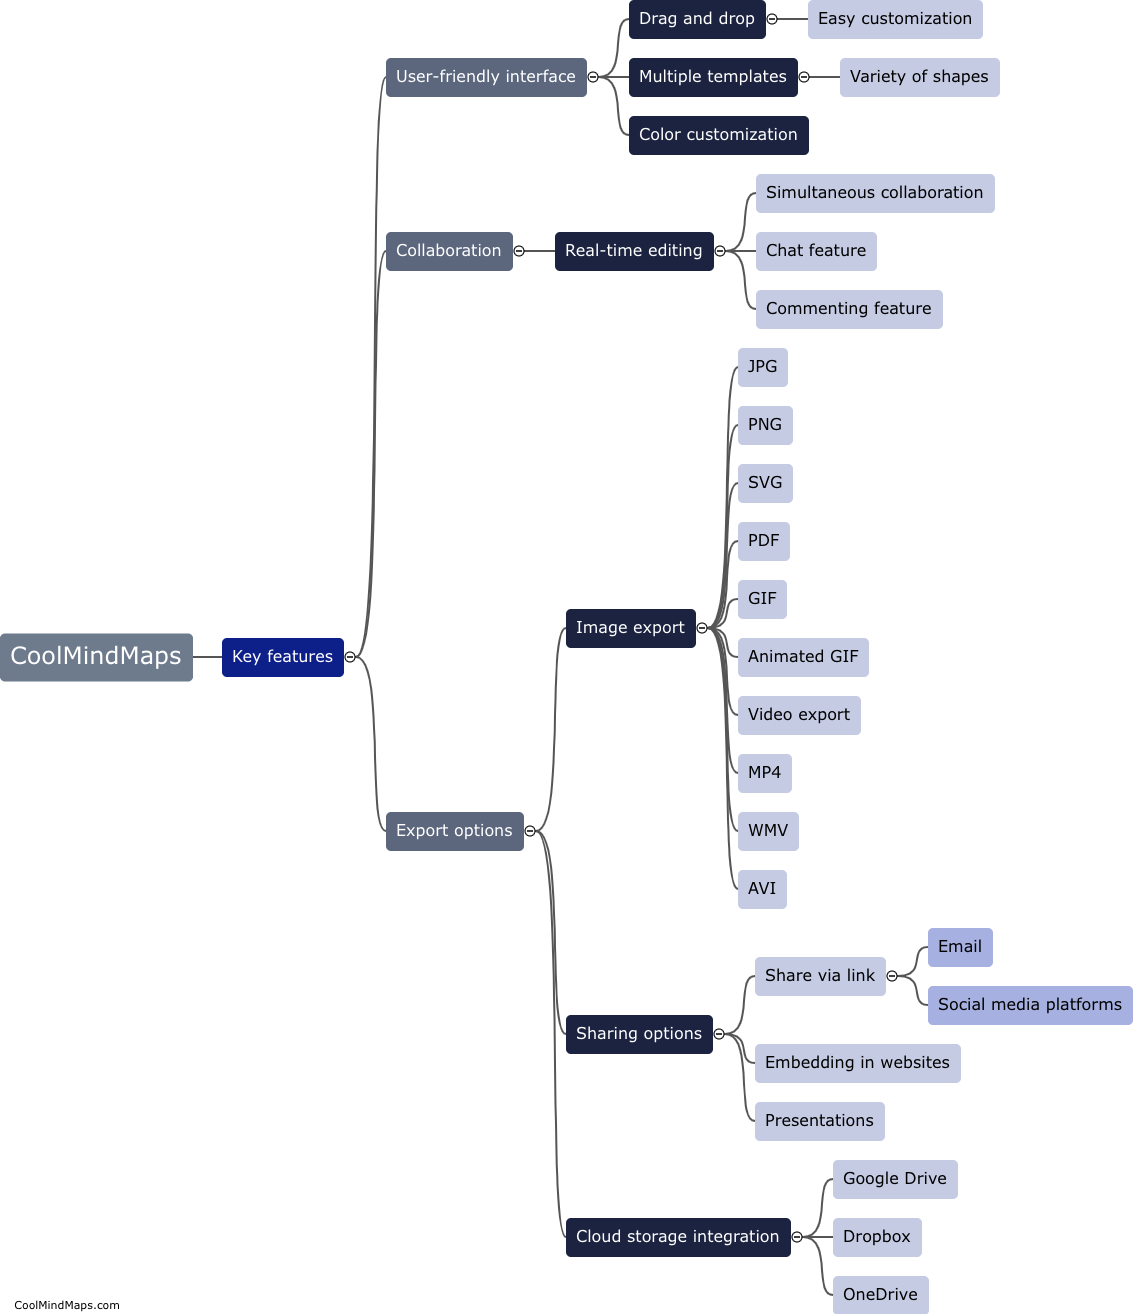 What are the key features of CoolMindMaps?